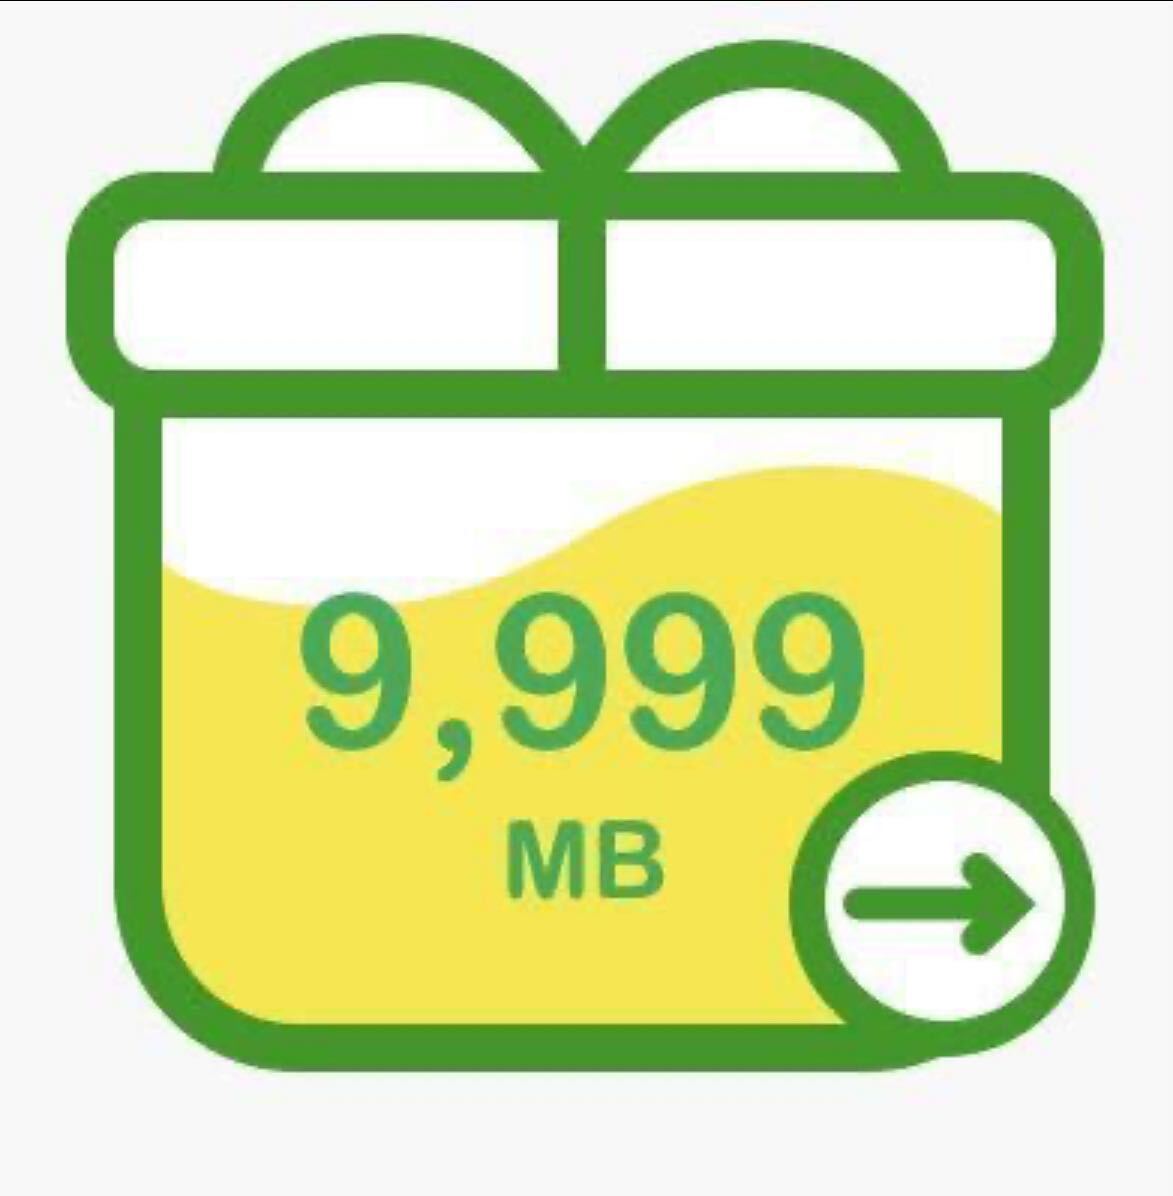  my Neo *mineo packet gift 10GB(9999MB)